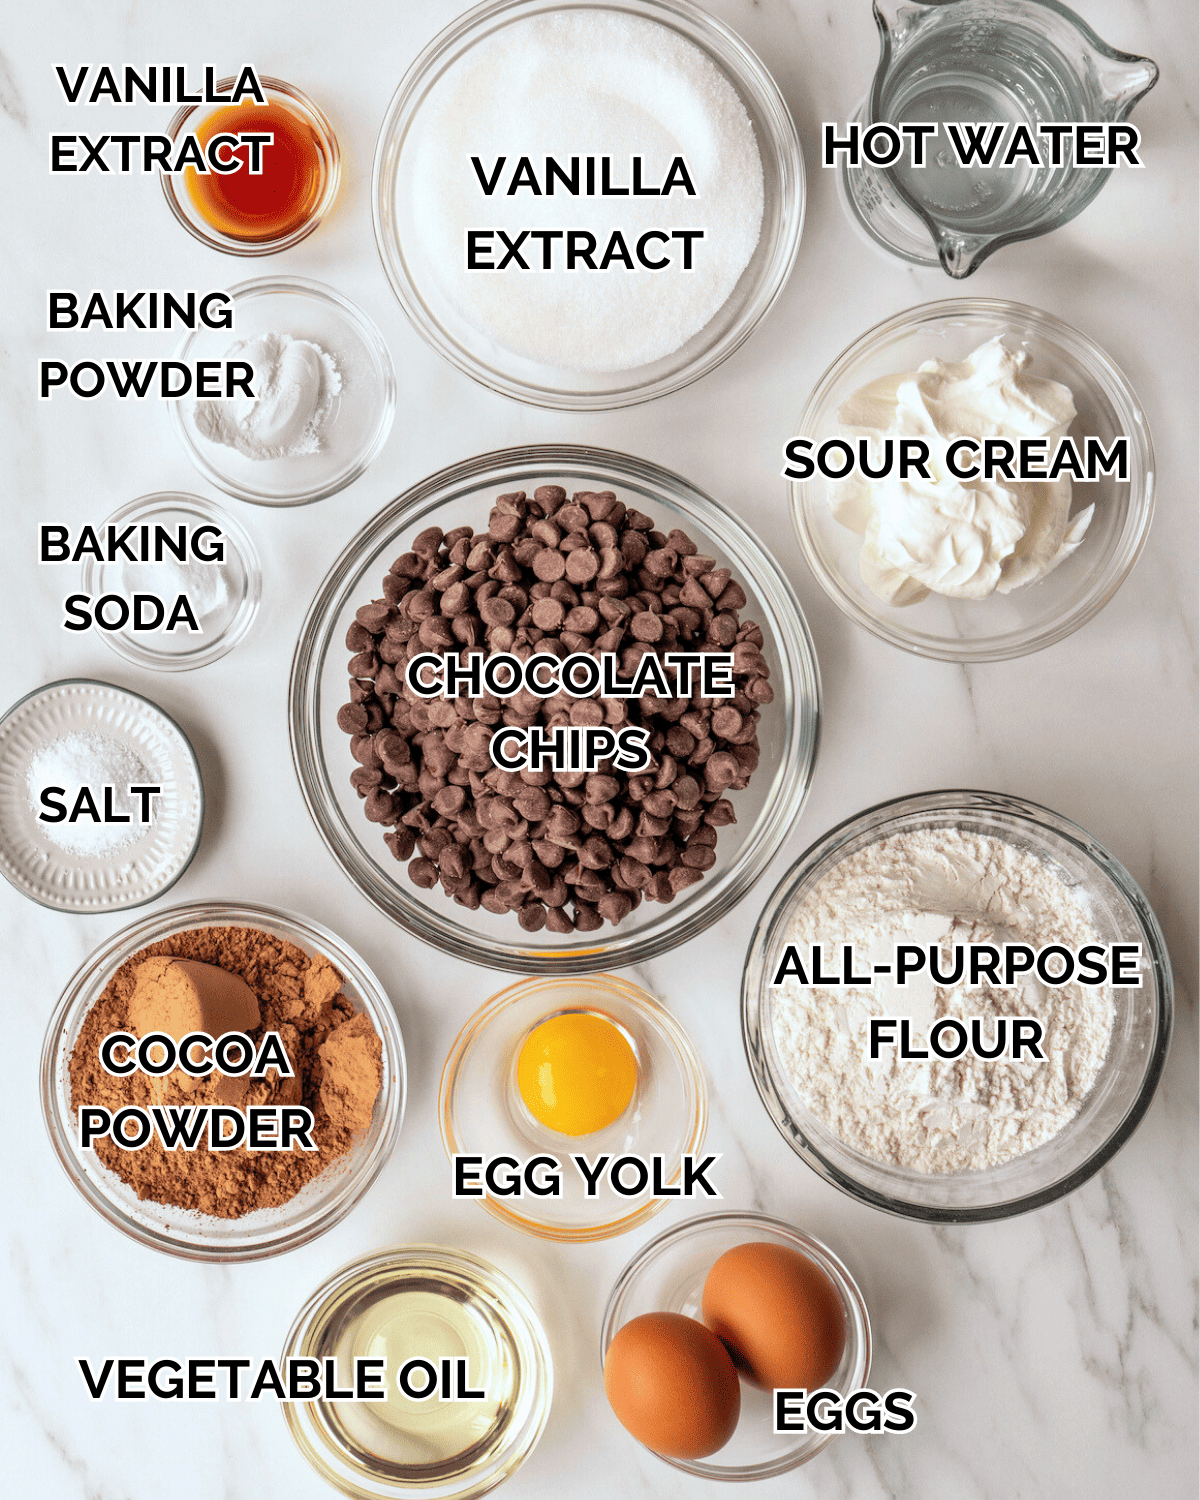 Mise-en-place with all the ingredients required to make double chocolate chip muffins.